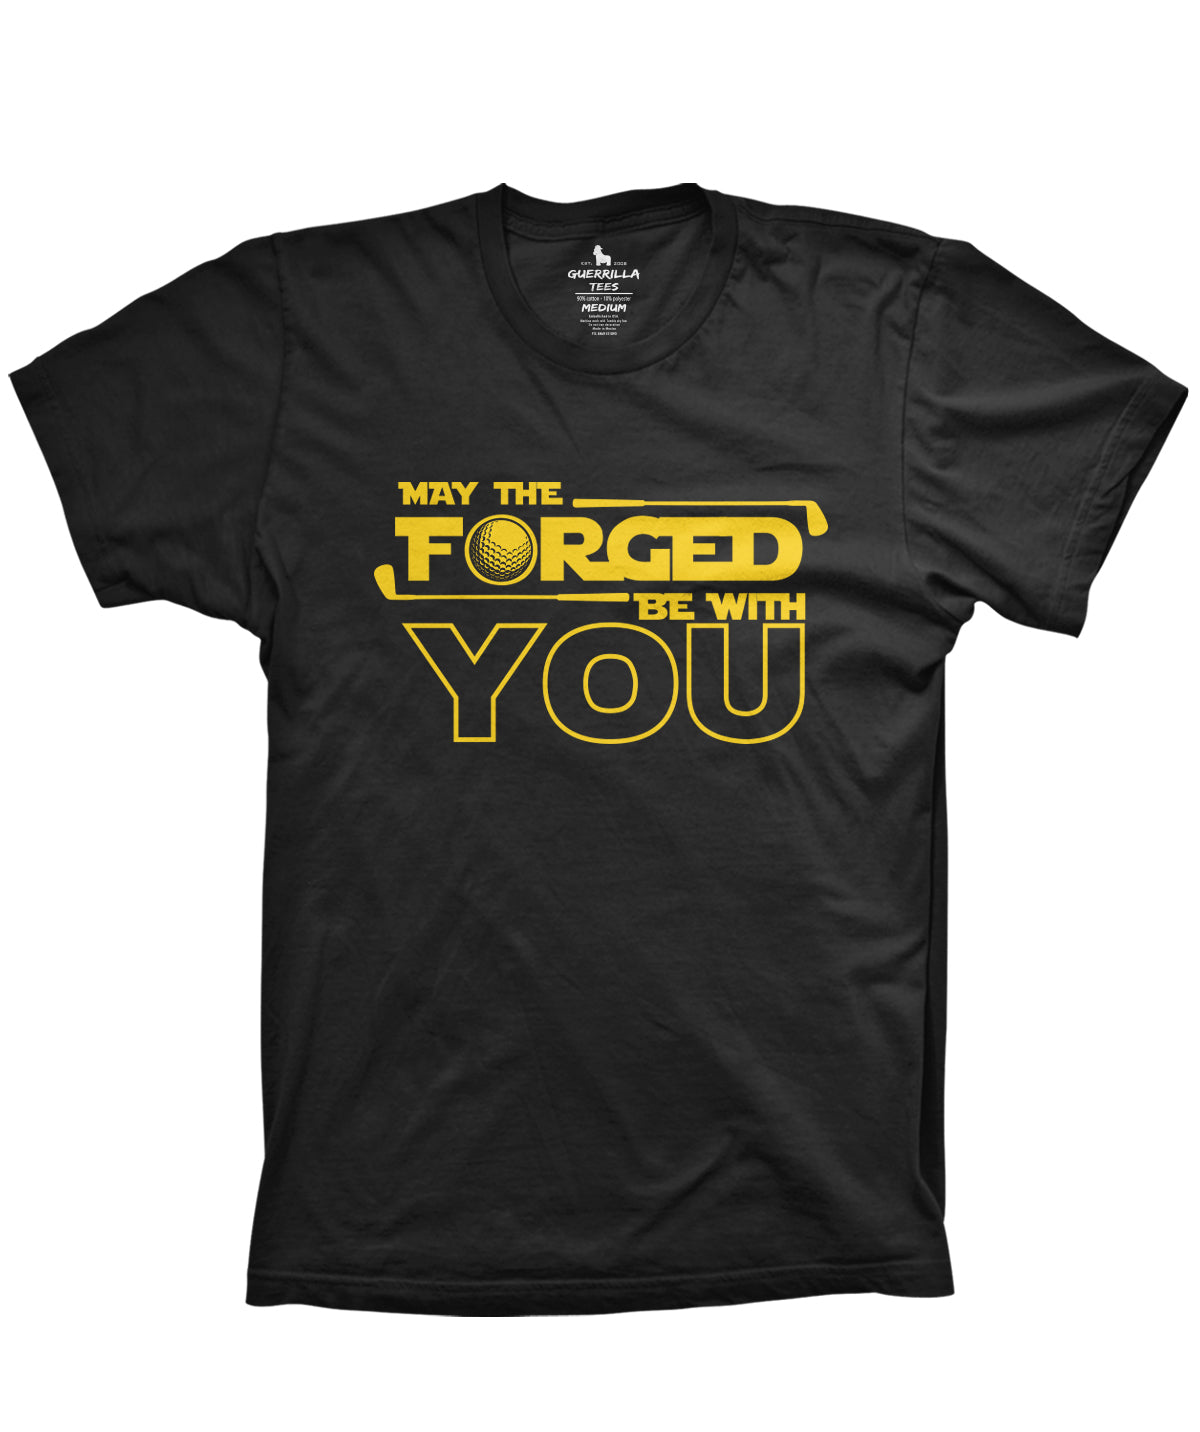 May The Forged Be With You T-Shirt